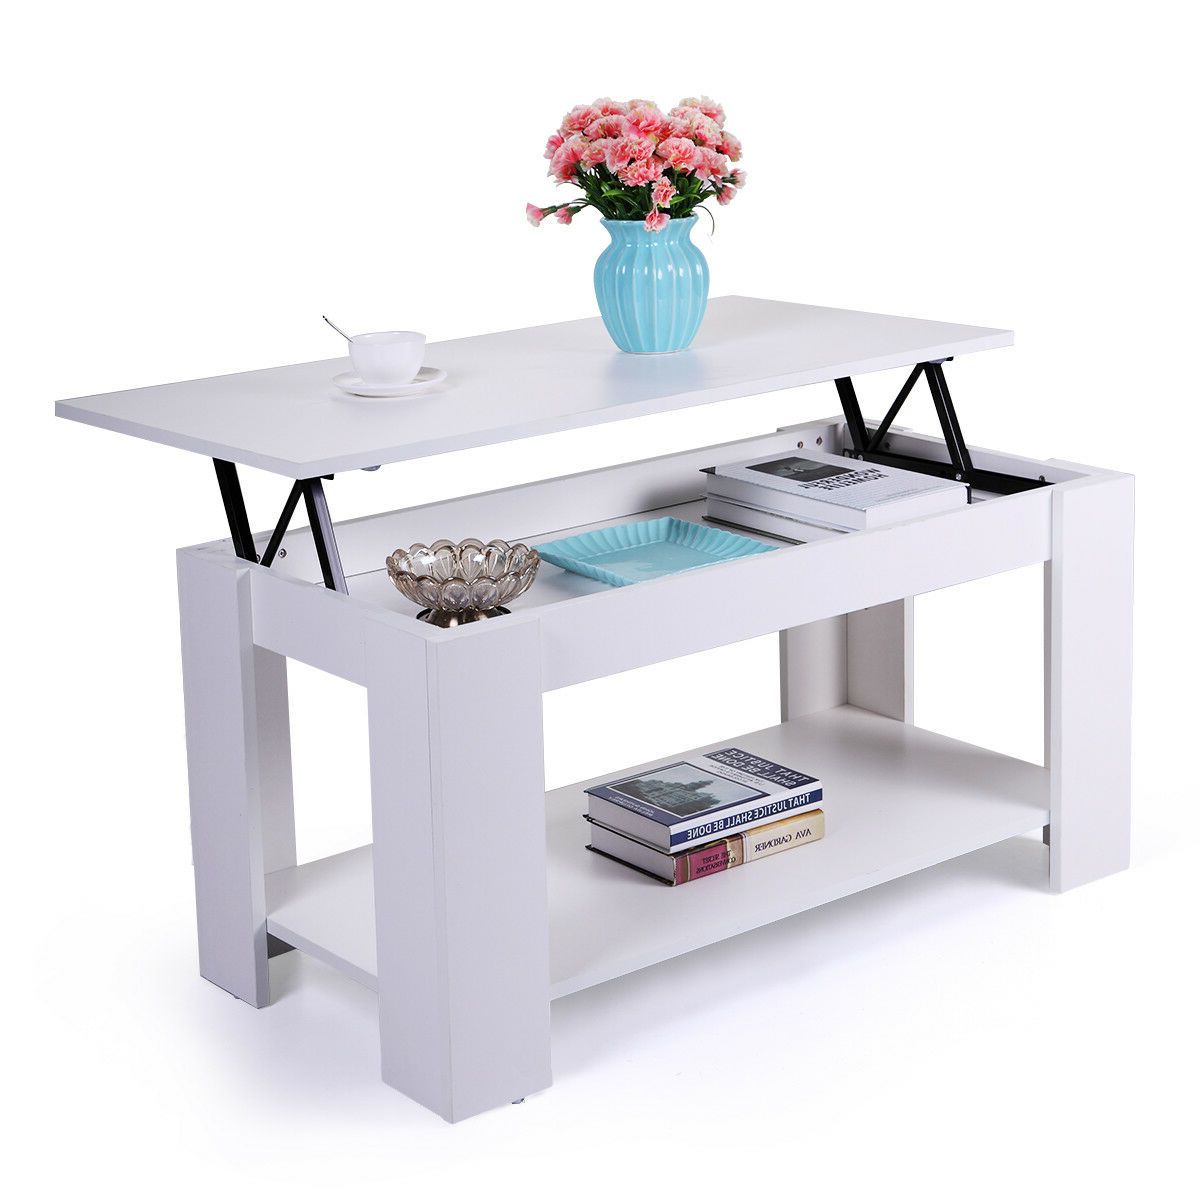 Favorite Espresso Wood Storage Coffee Tables Regarding Lowestbest Lift Top Coffee Table, White Coffee Table With (View 14 of 20)